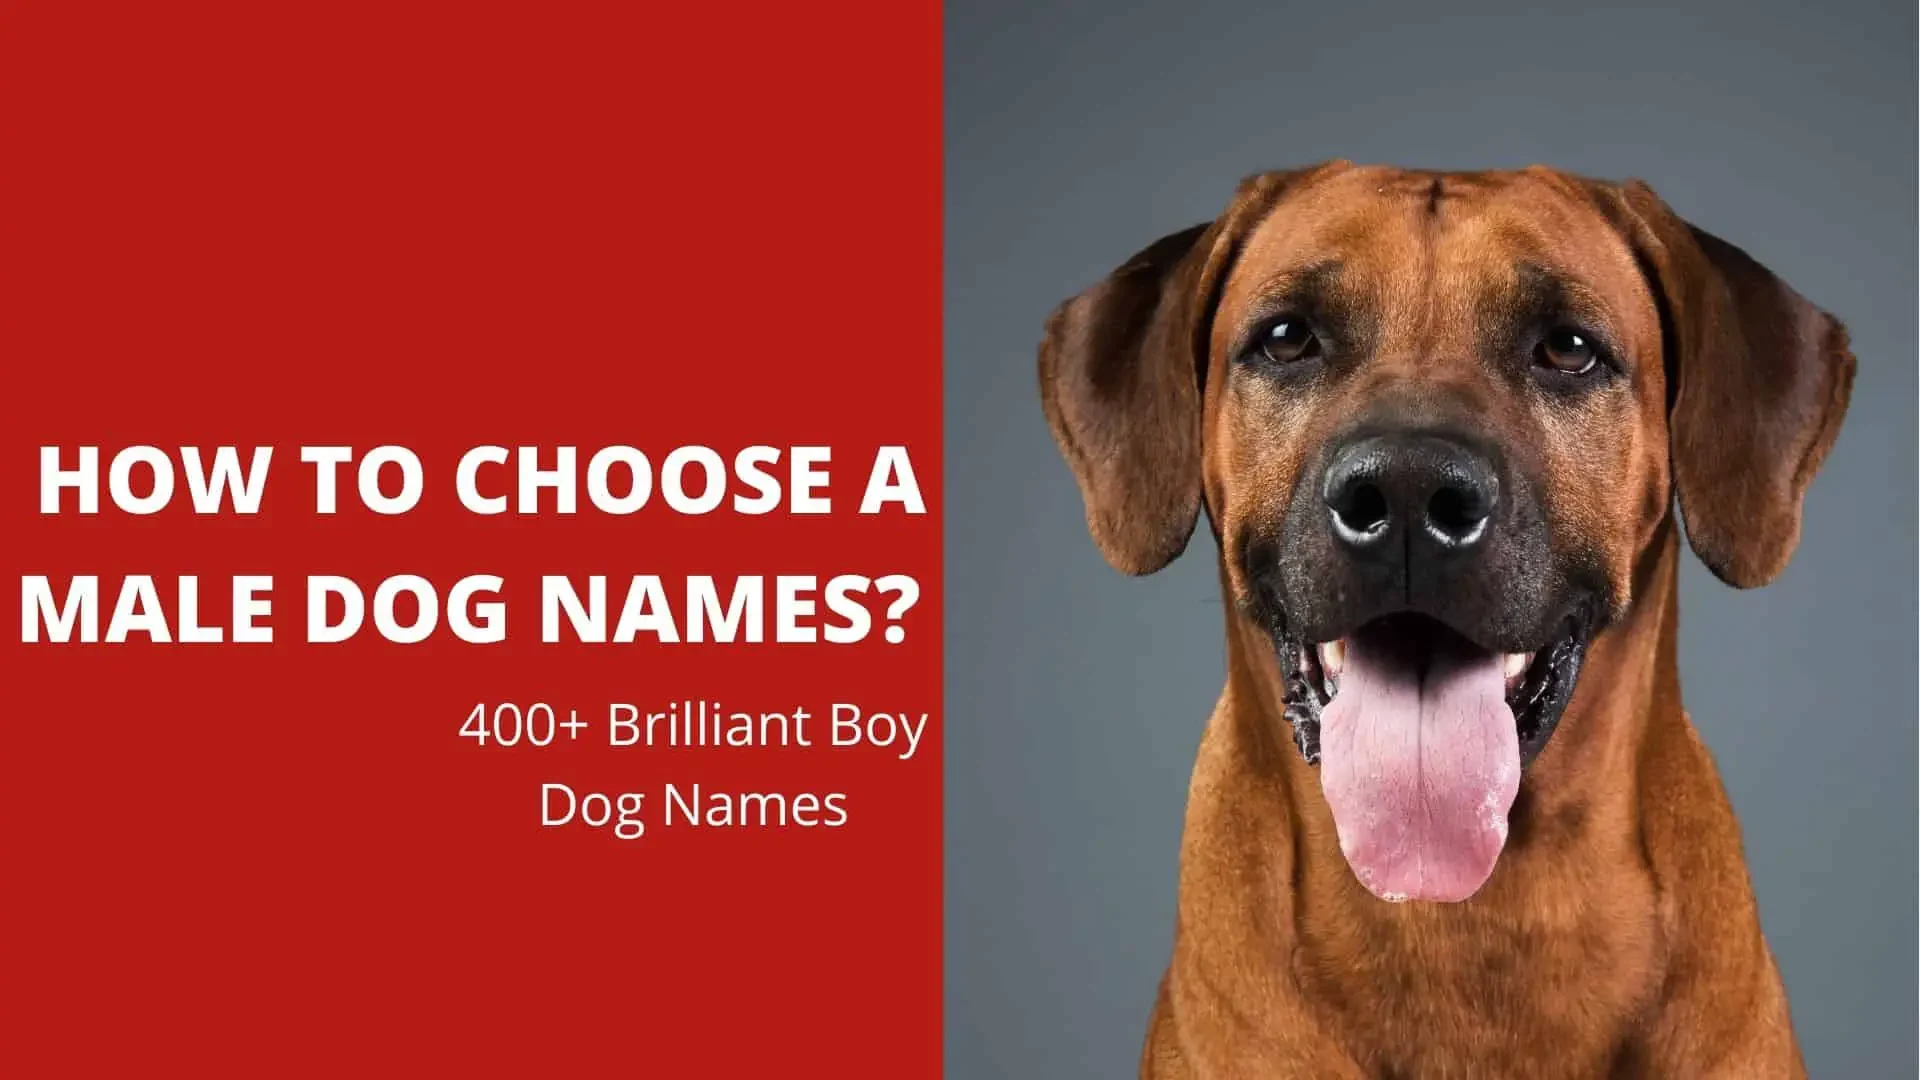 How To Choose A Male Dog Names? 400+ Brilliant Boy Dog Names